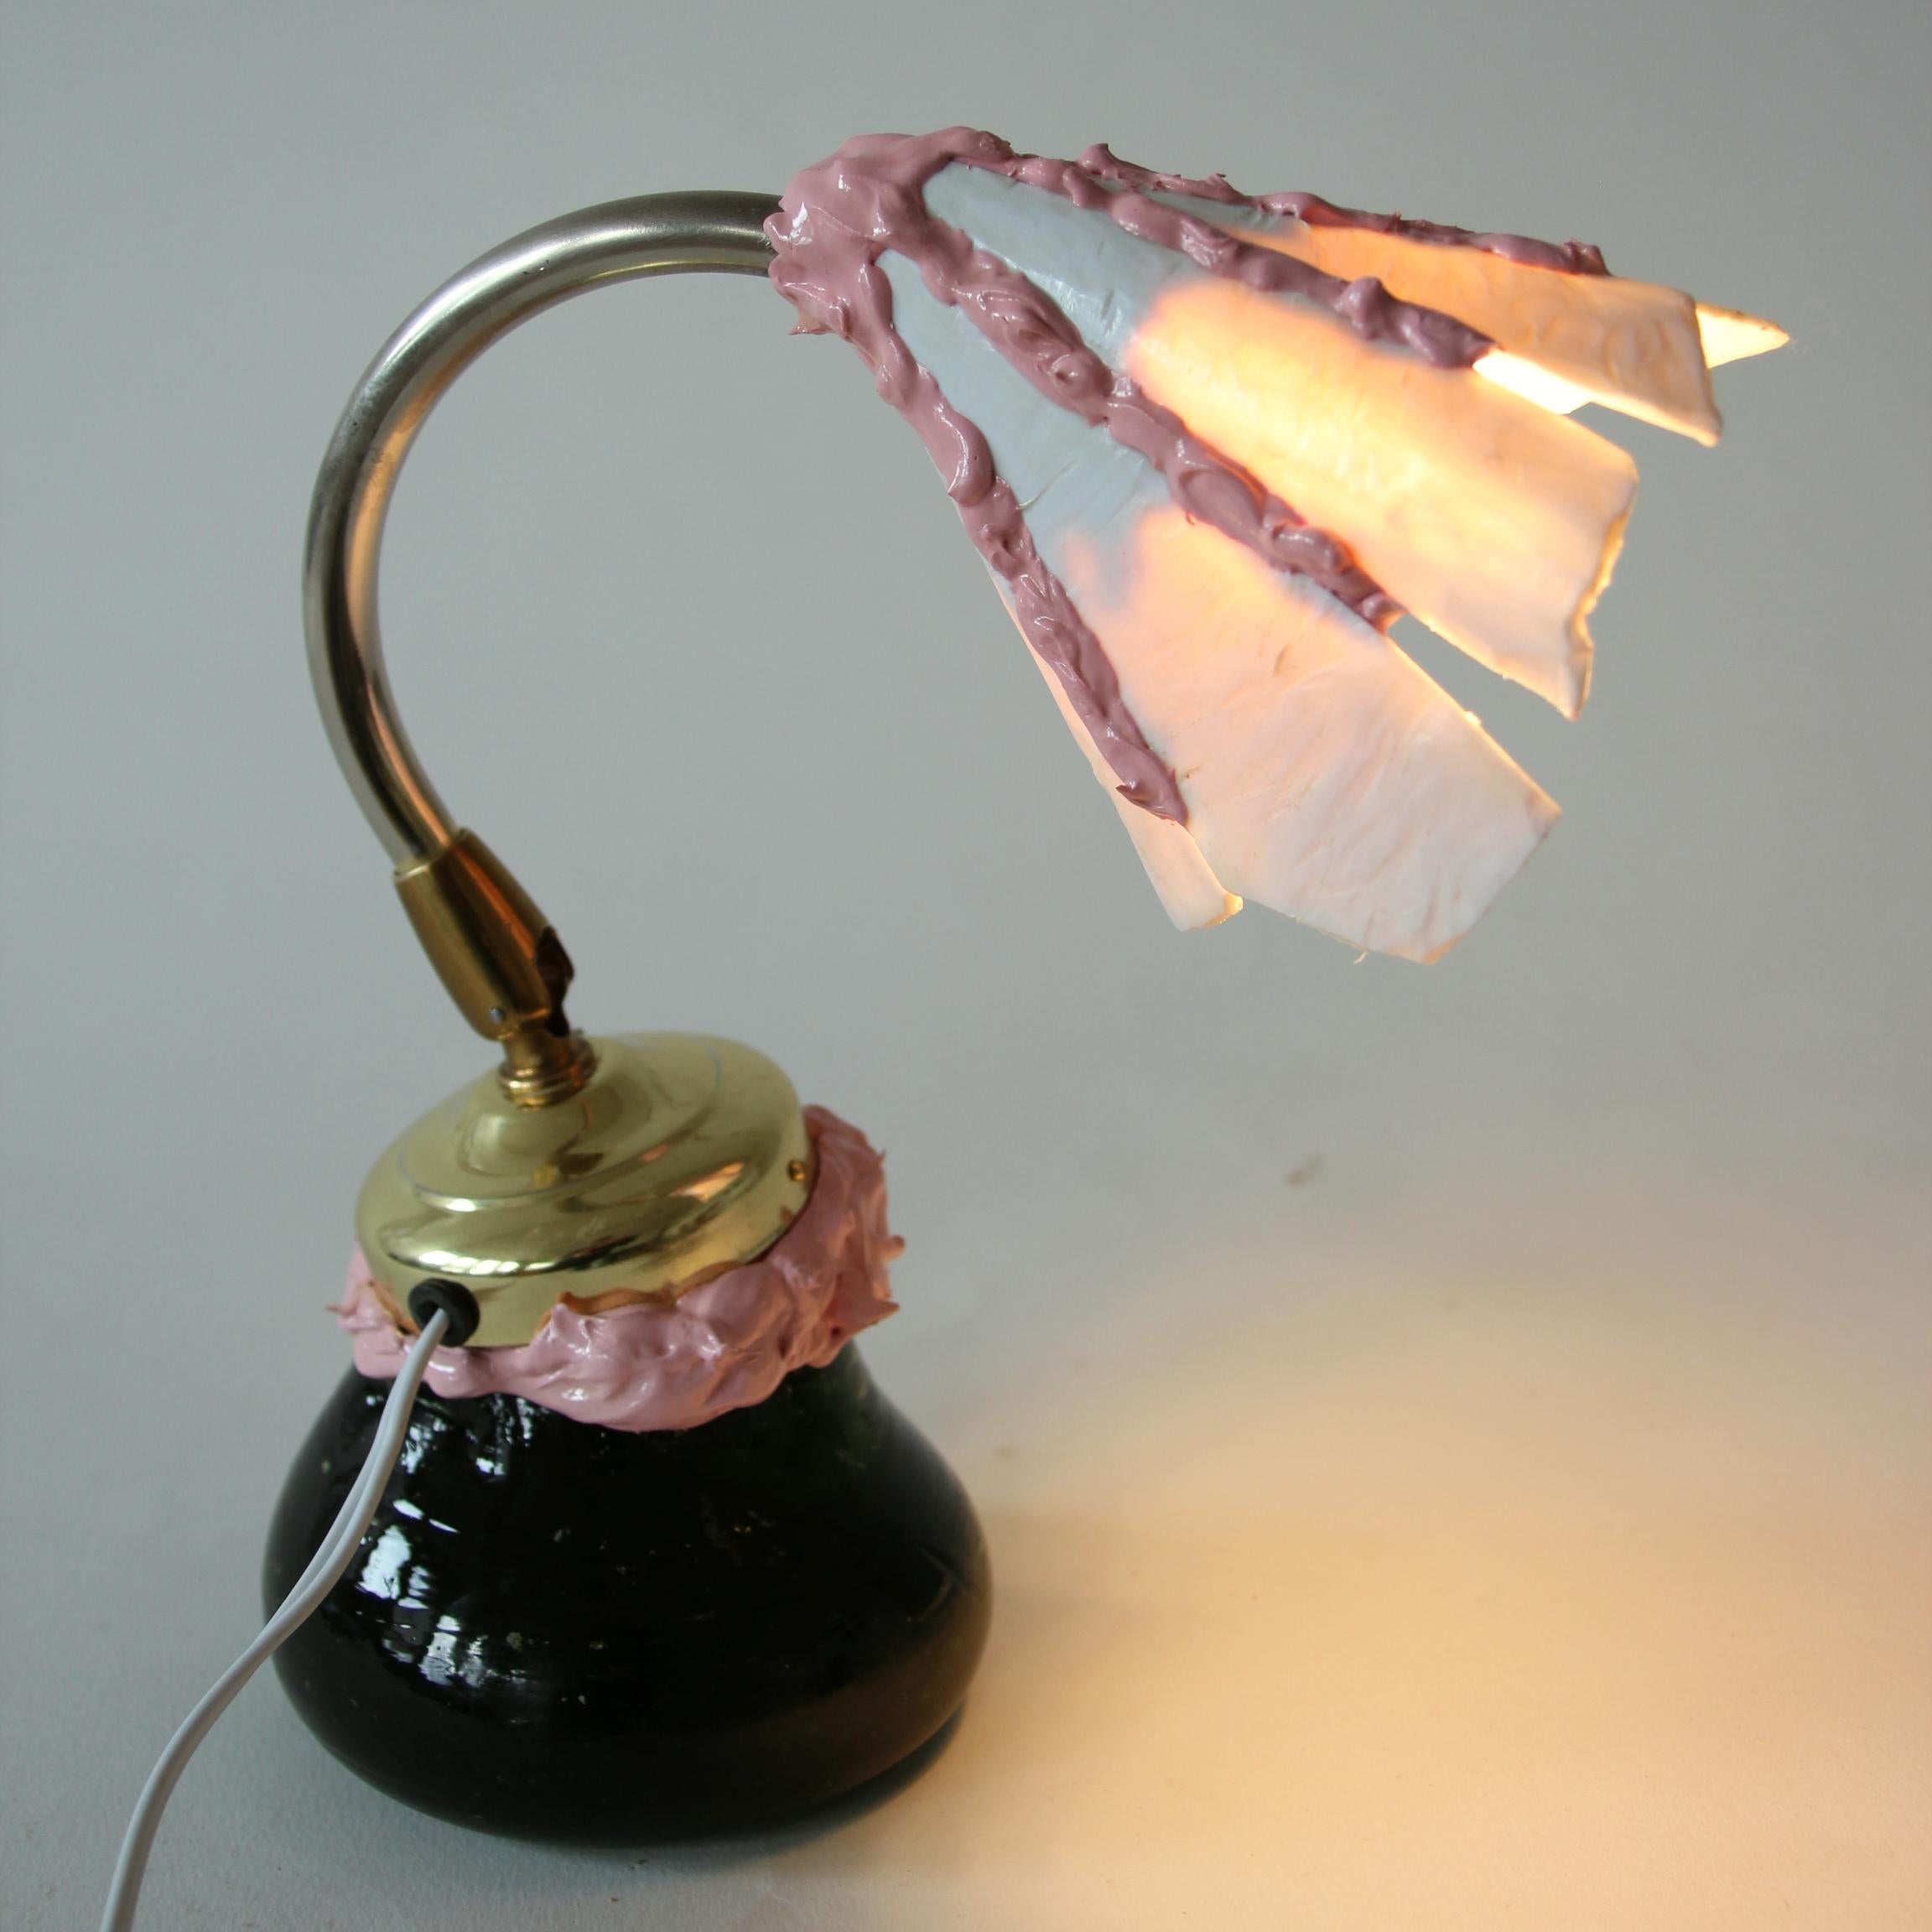 Hand-Carved Small Unique Table Lamp from Found Objects by Designer Teemu Salonen, in Stock